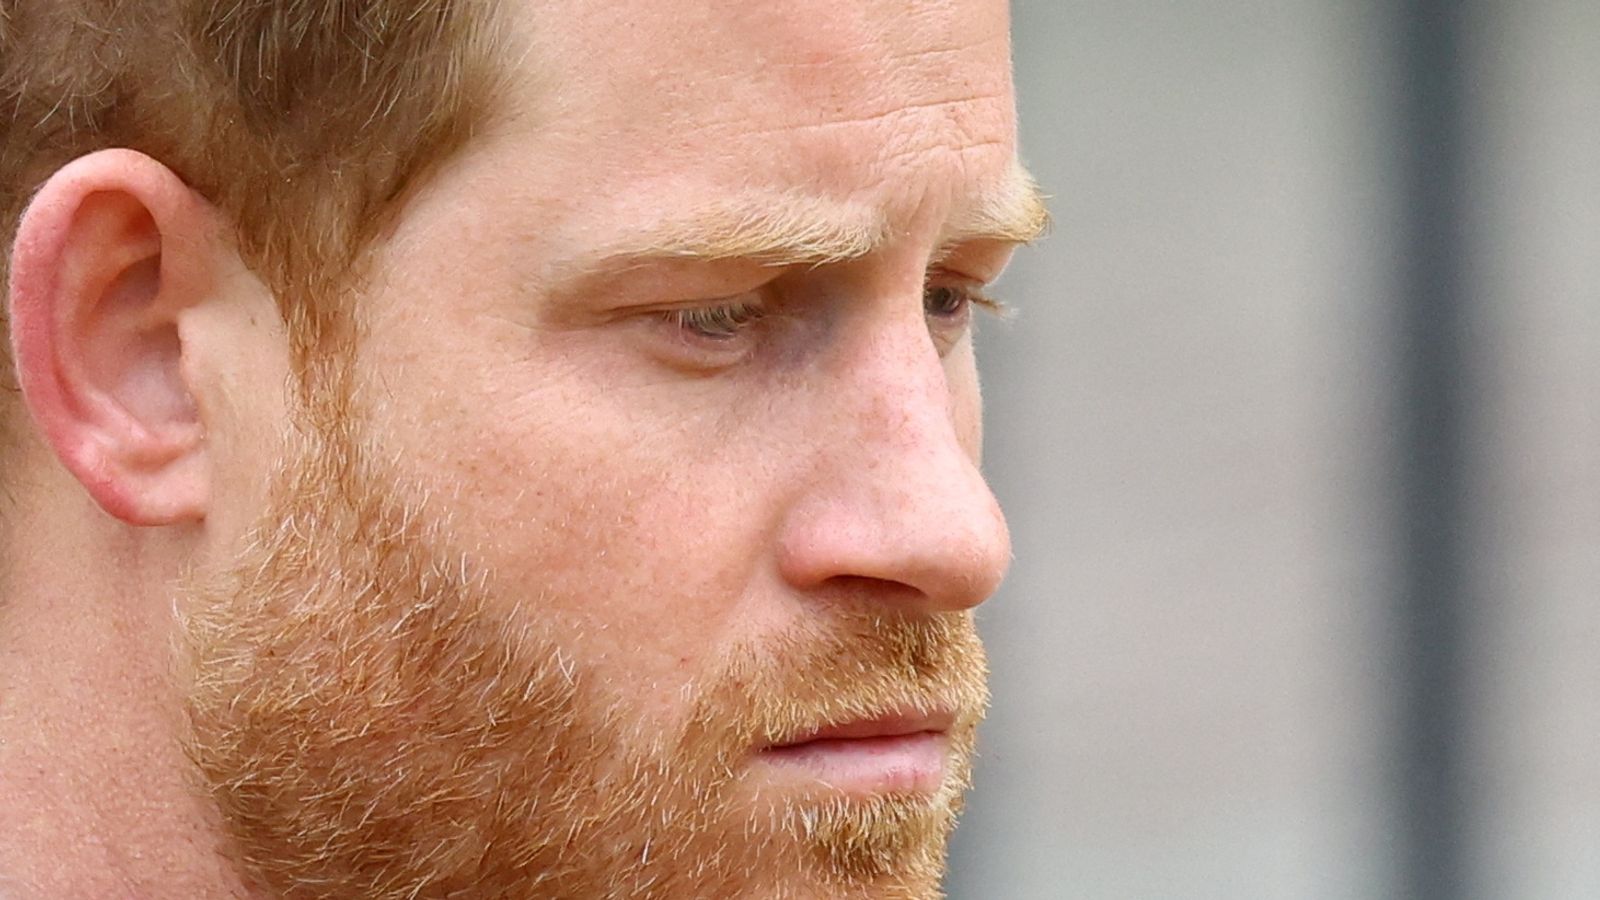 Prince Harry tells Royal Family: 'Come clean' and apologise to Meghan